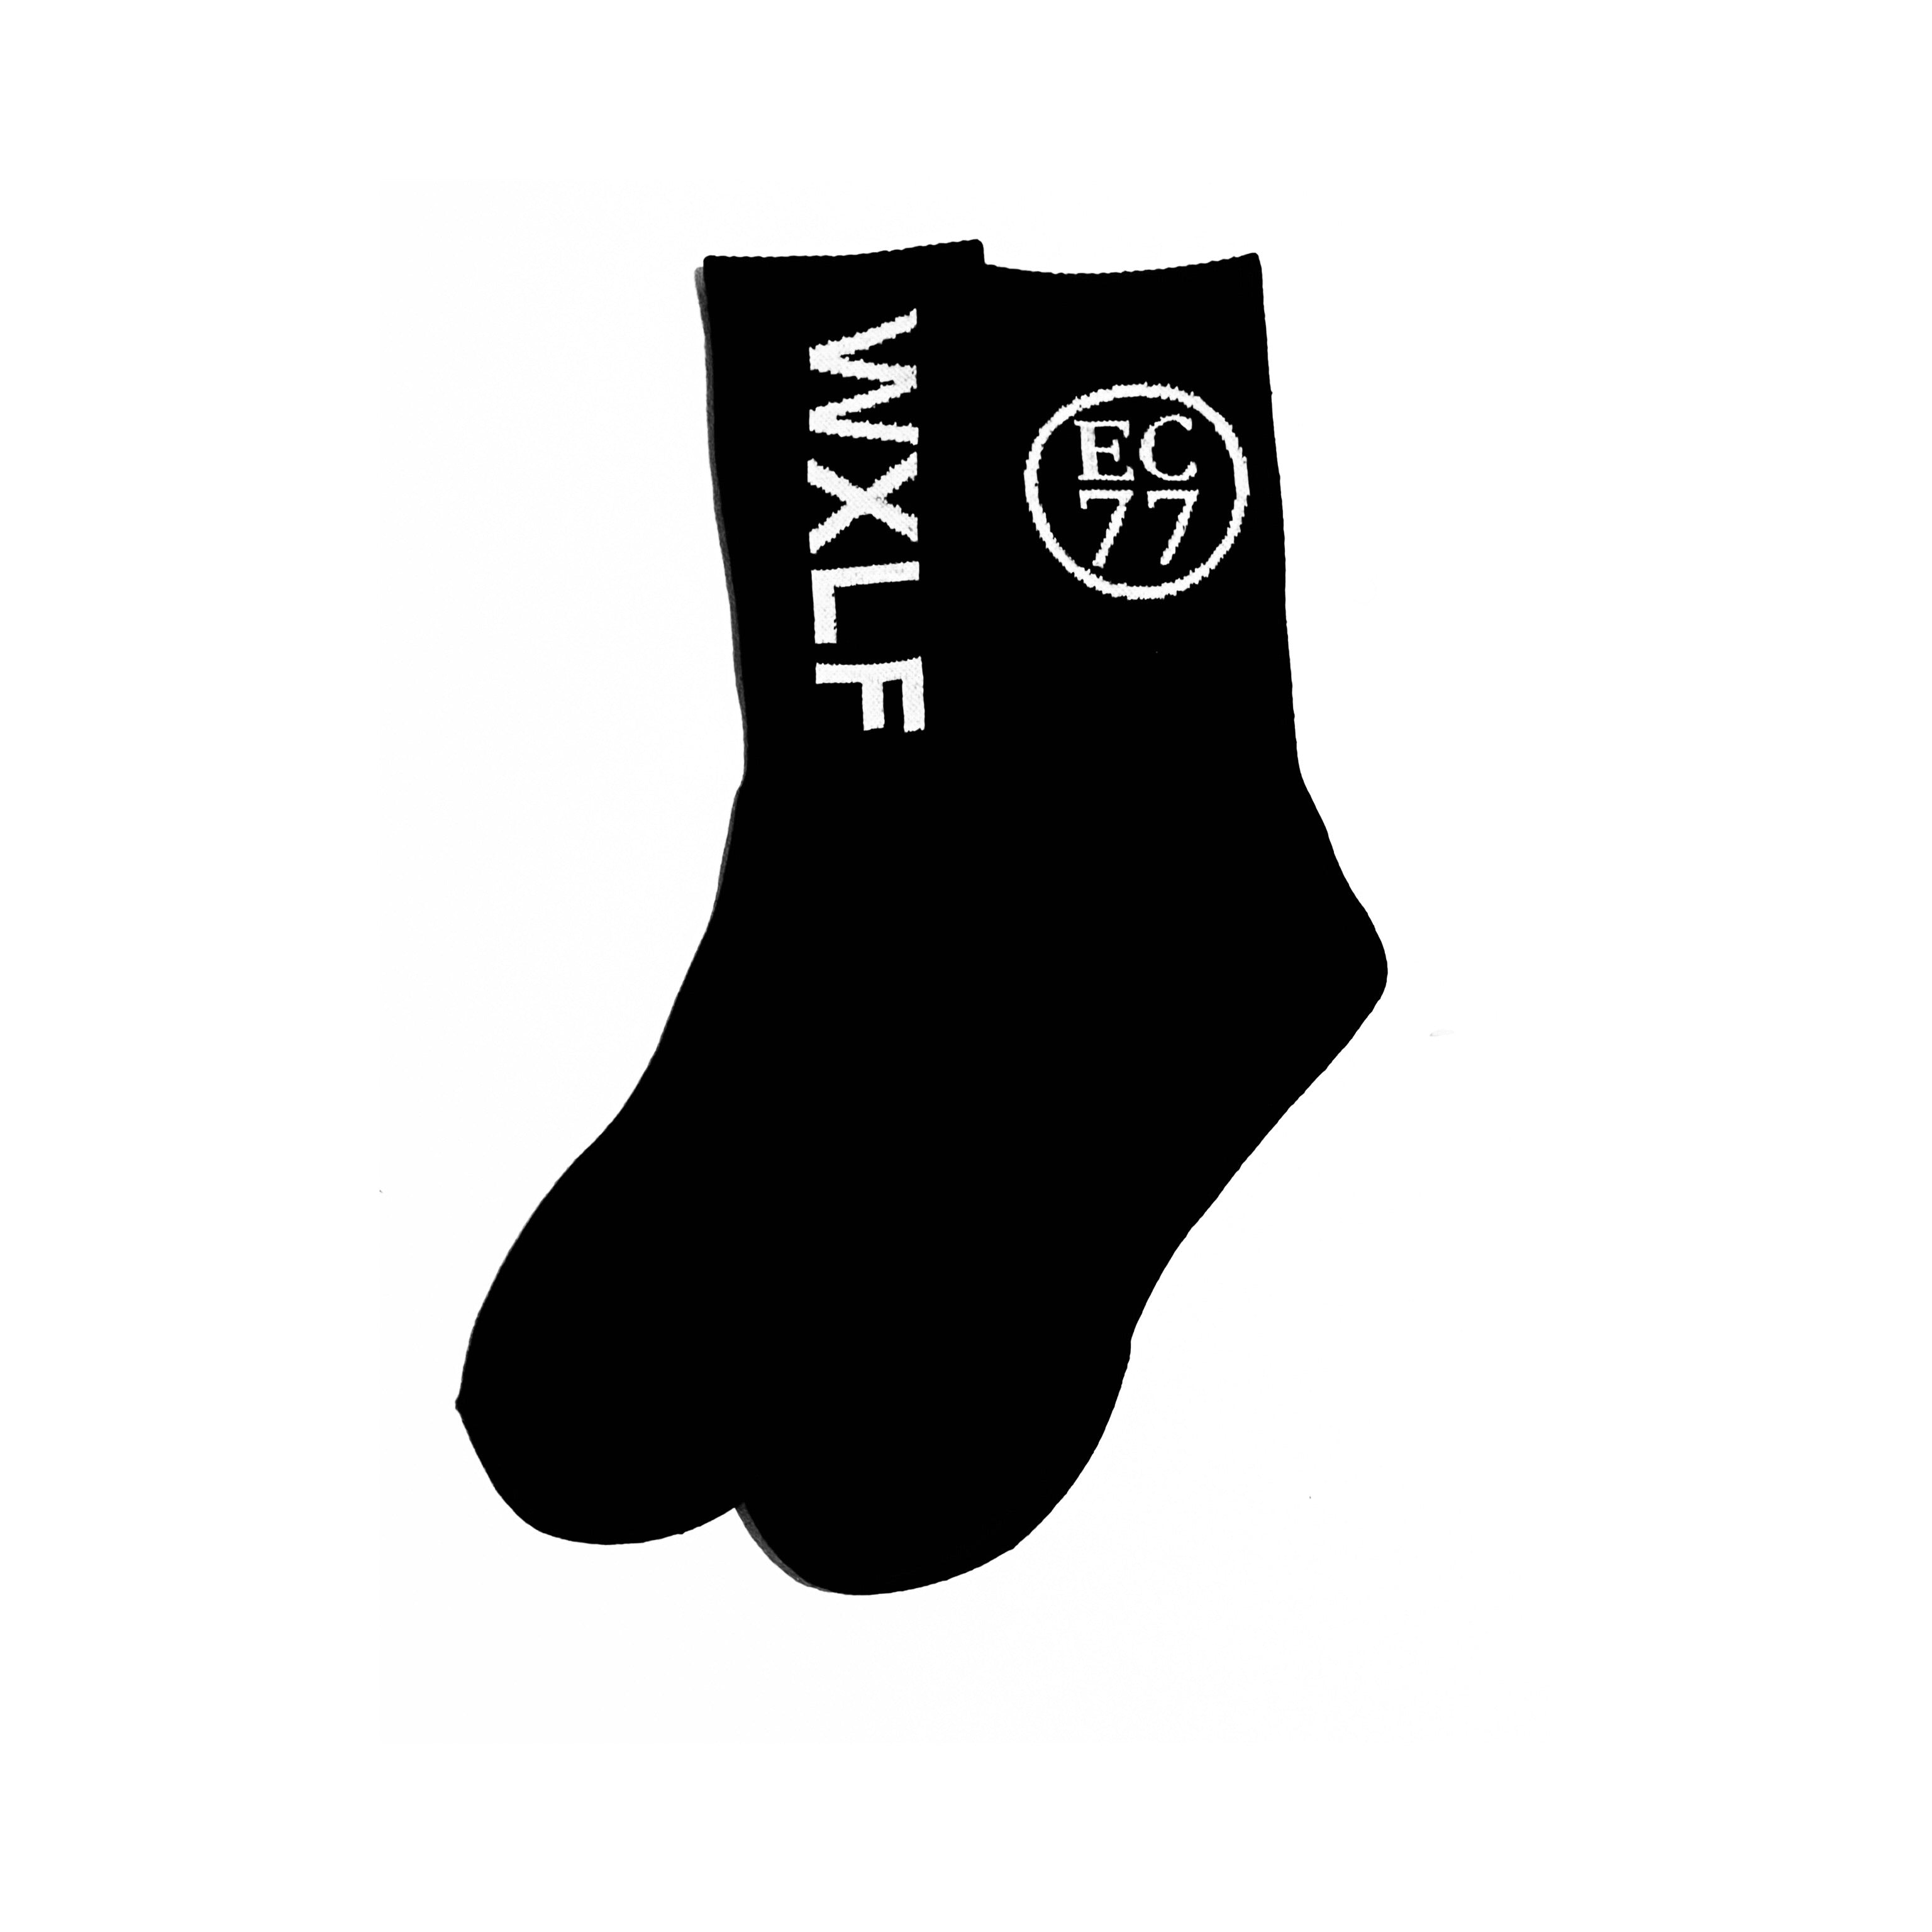 The Wxlf Summer Sock - One or 2-Pack Pair